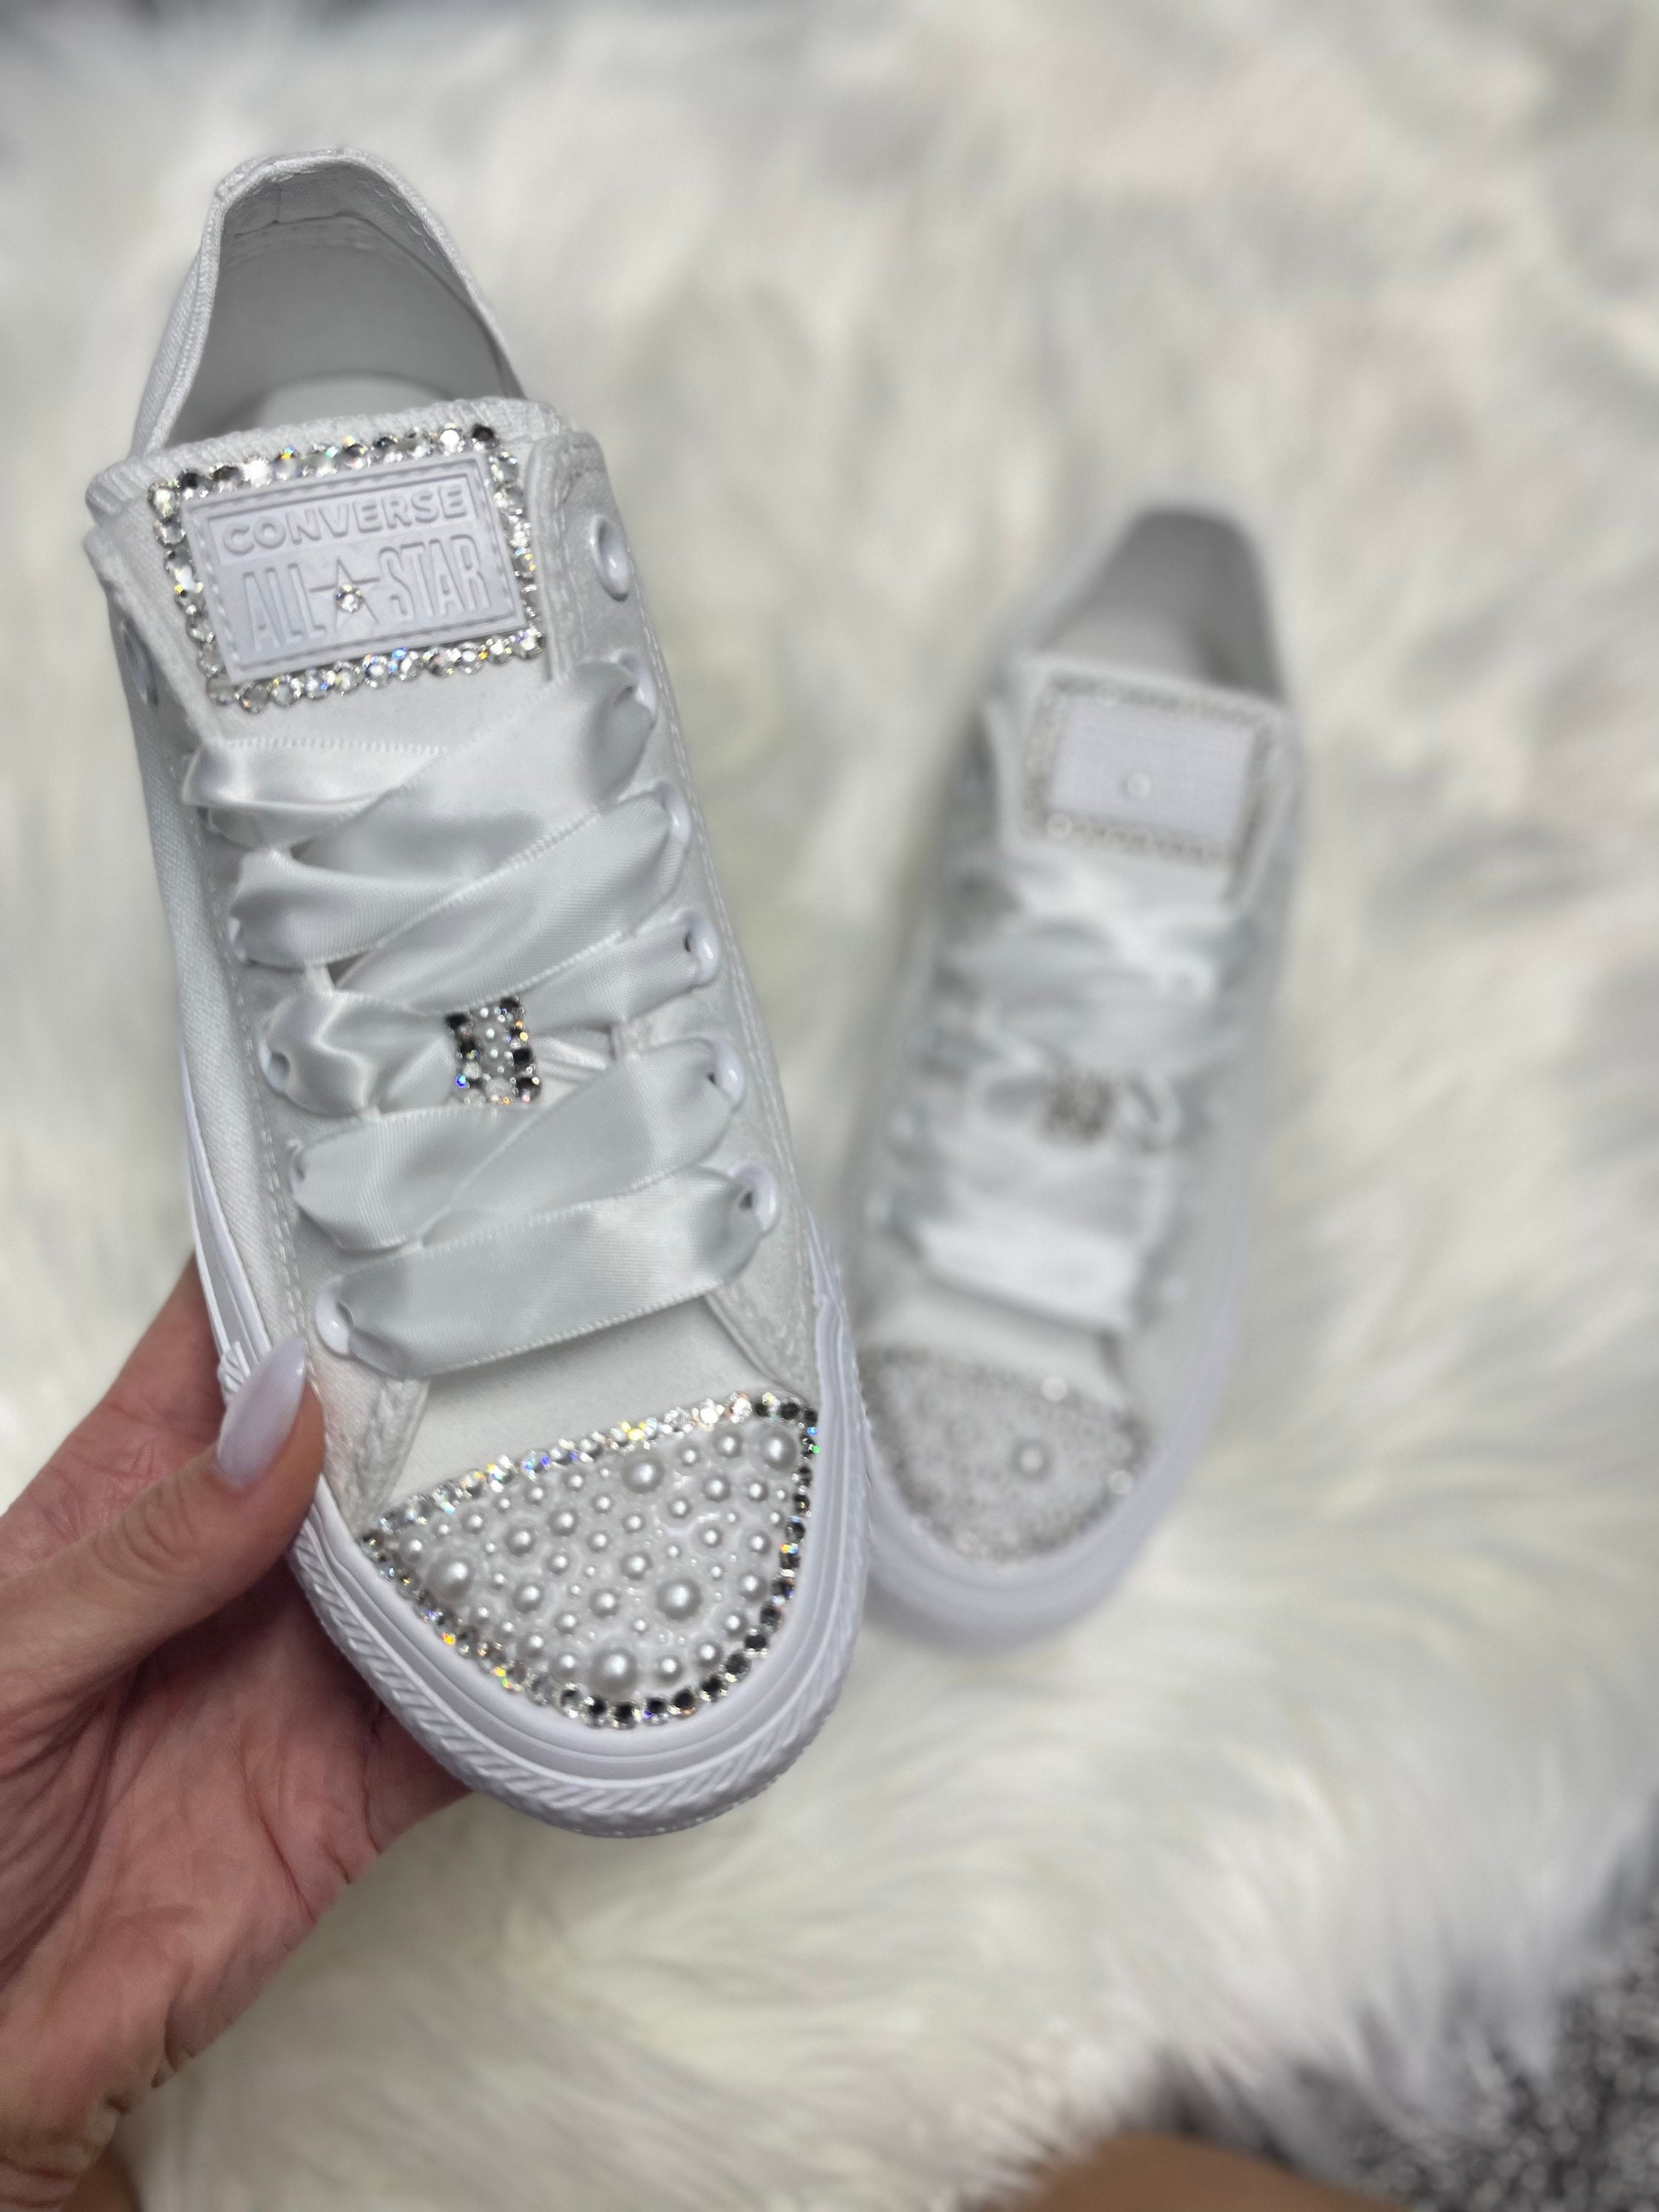 JEKO Women'S Glitter Tennis Sneakers Neon Dressy Sparkly Sneakers  Rhinestone Bling Wedding Bridal Shoes Shiny Sequin Shoes